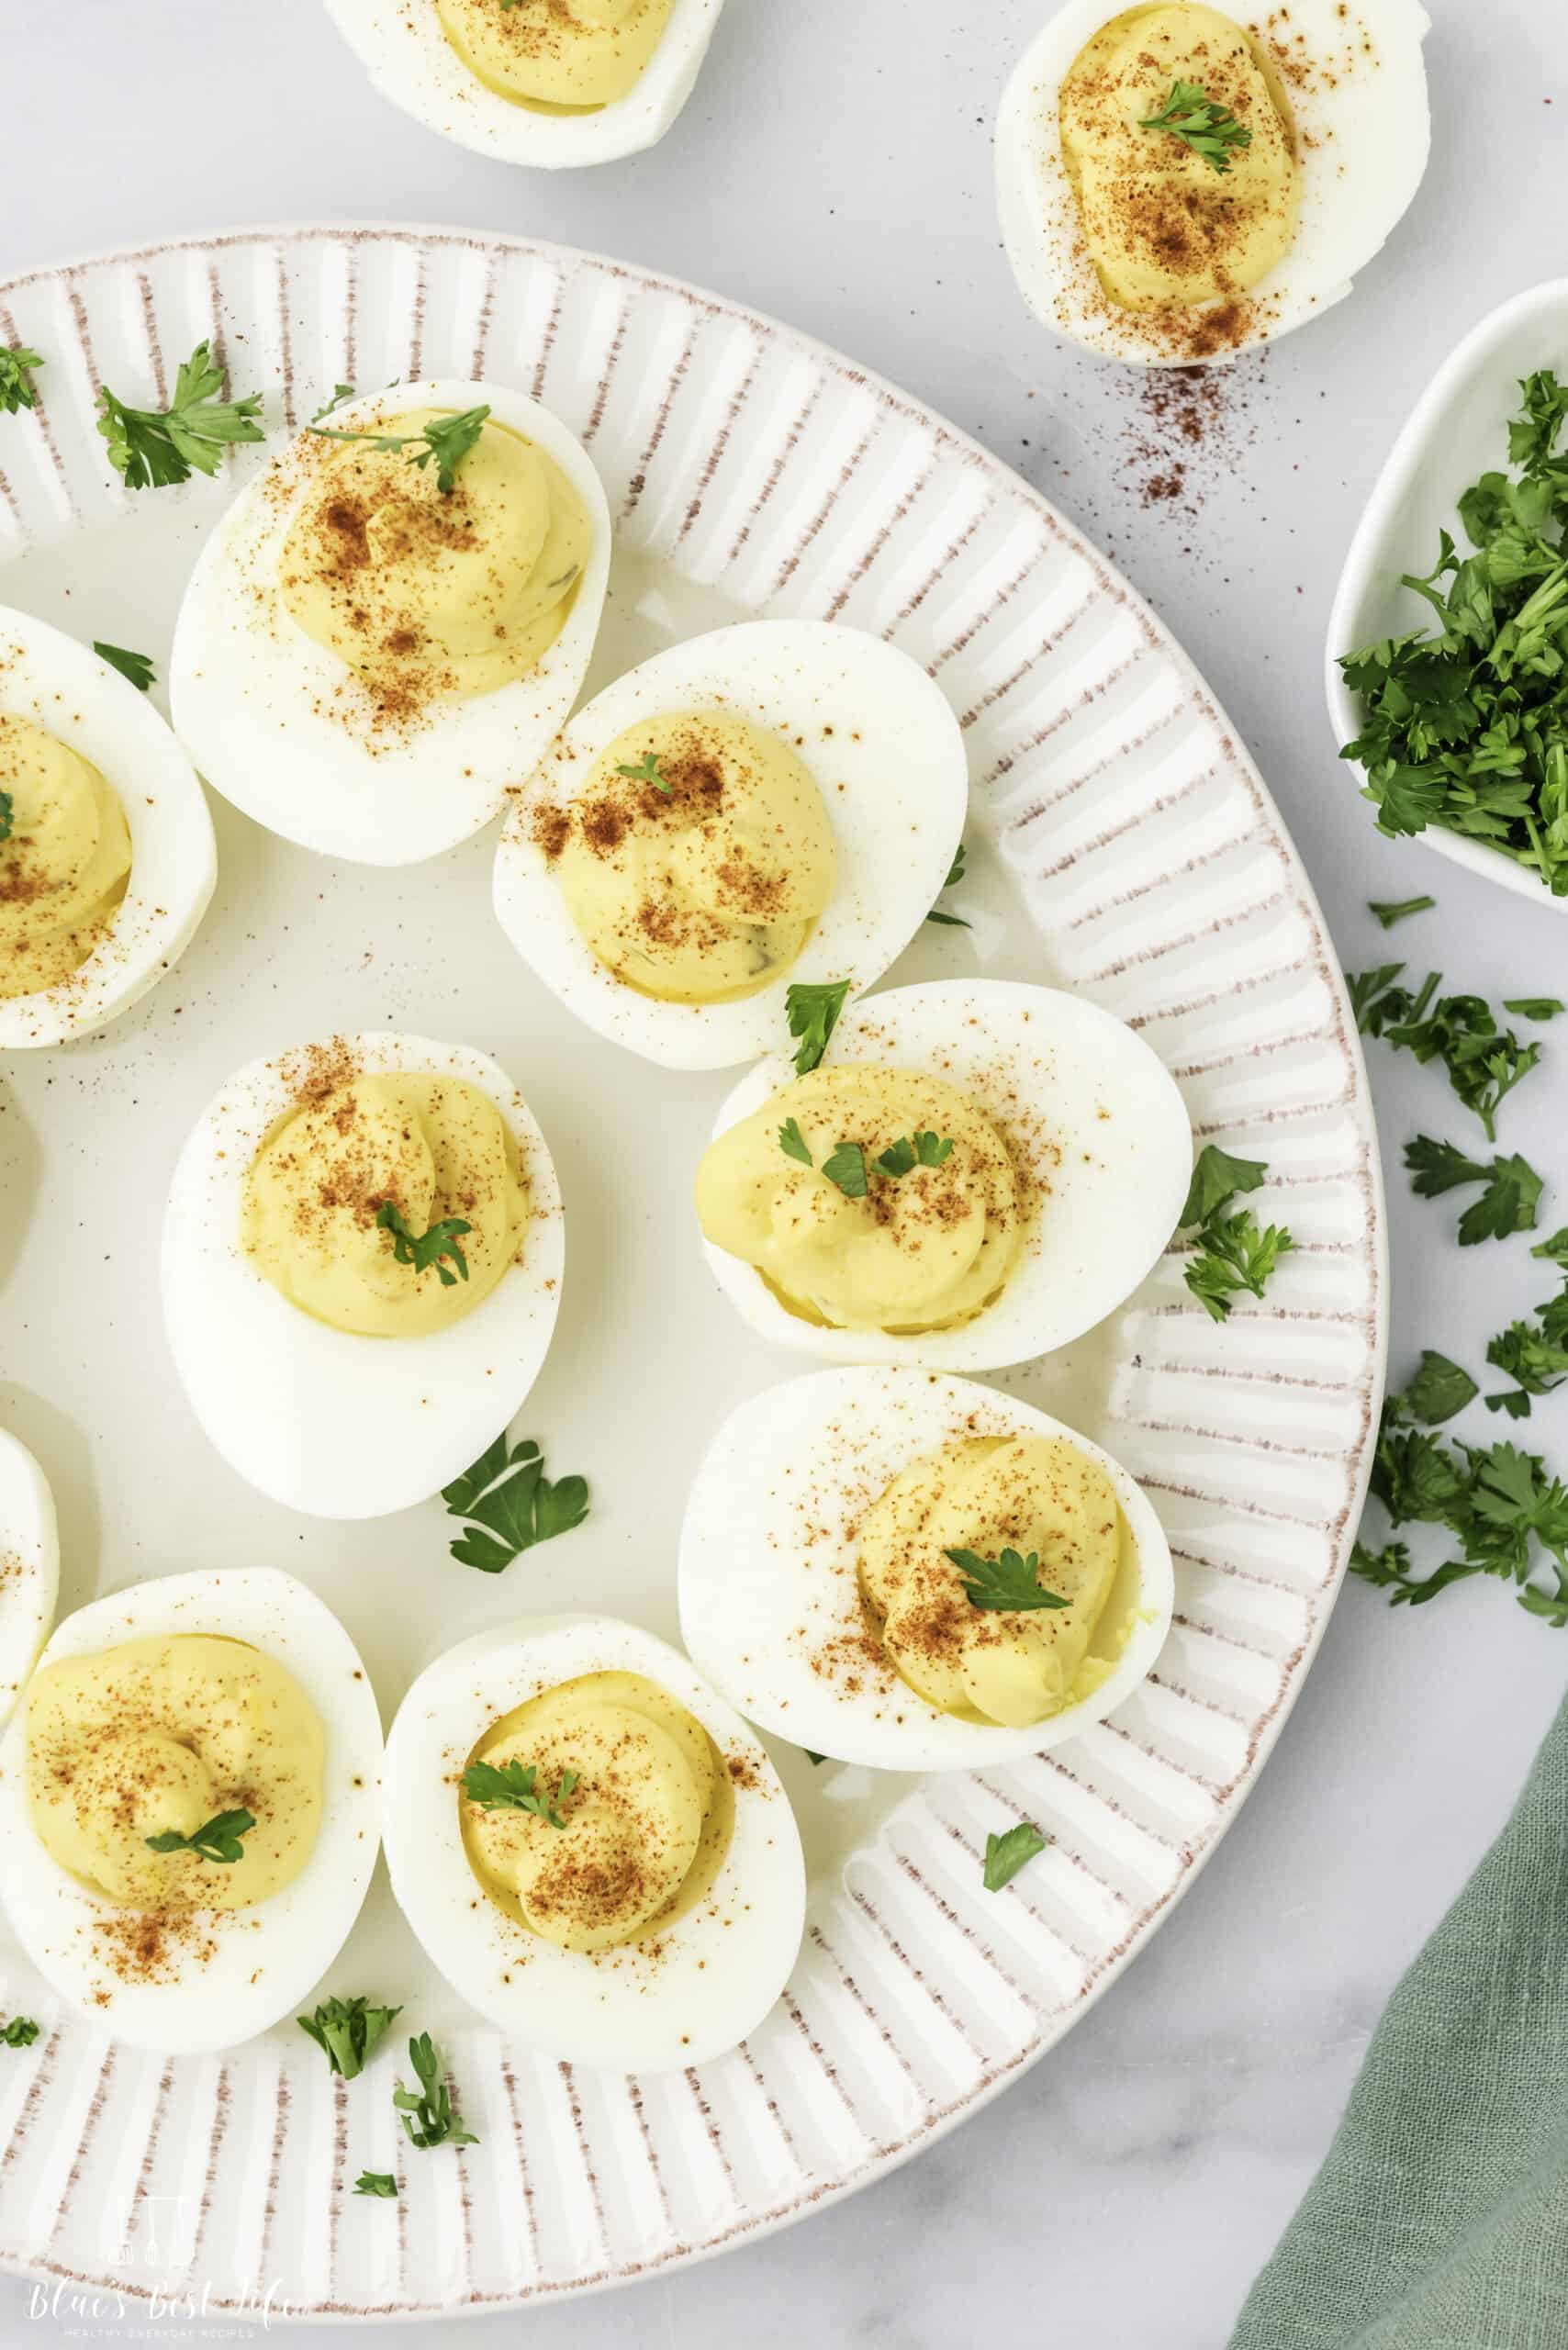 A plate with deviled eggs garnished with paprika and parsley.